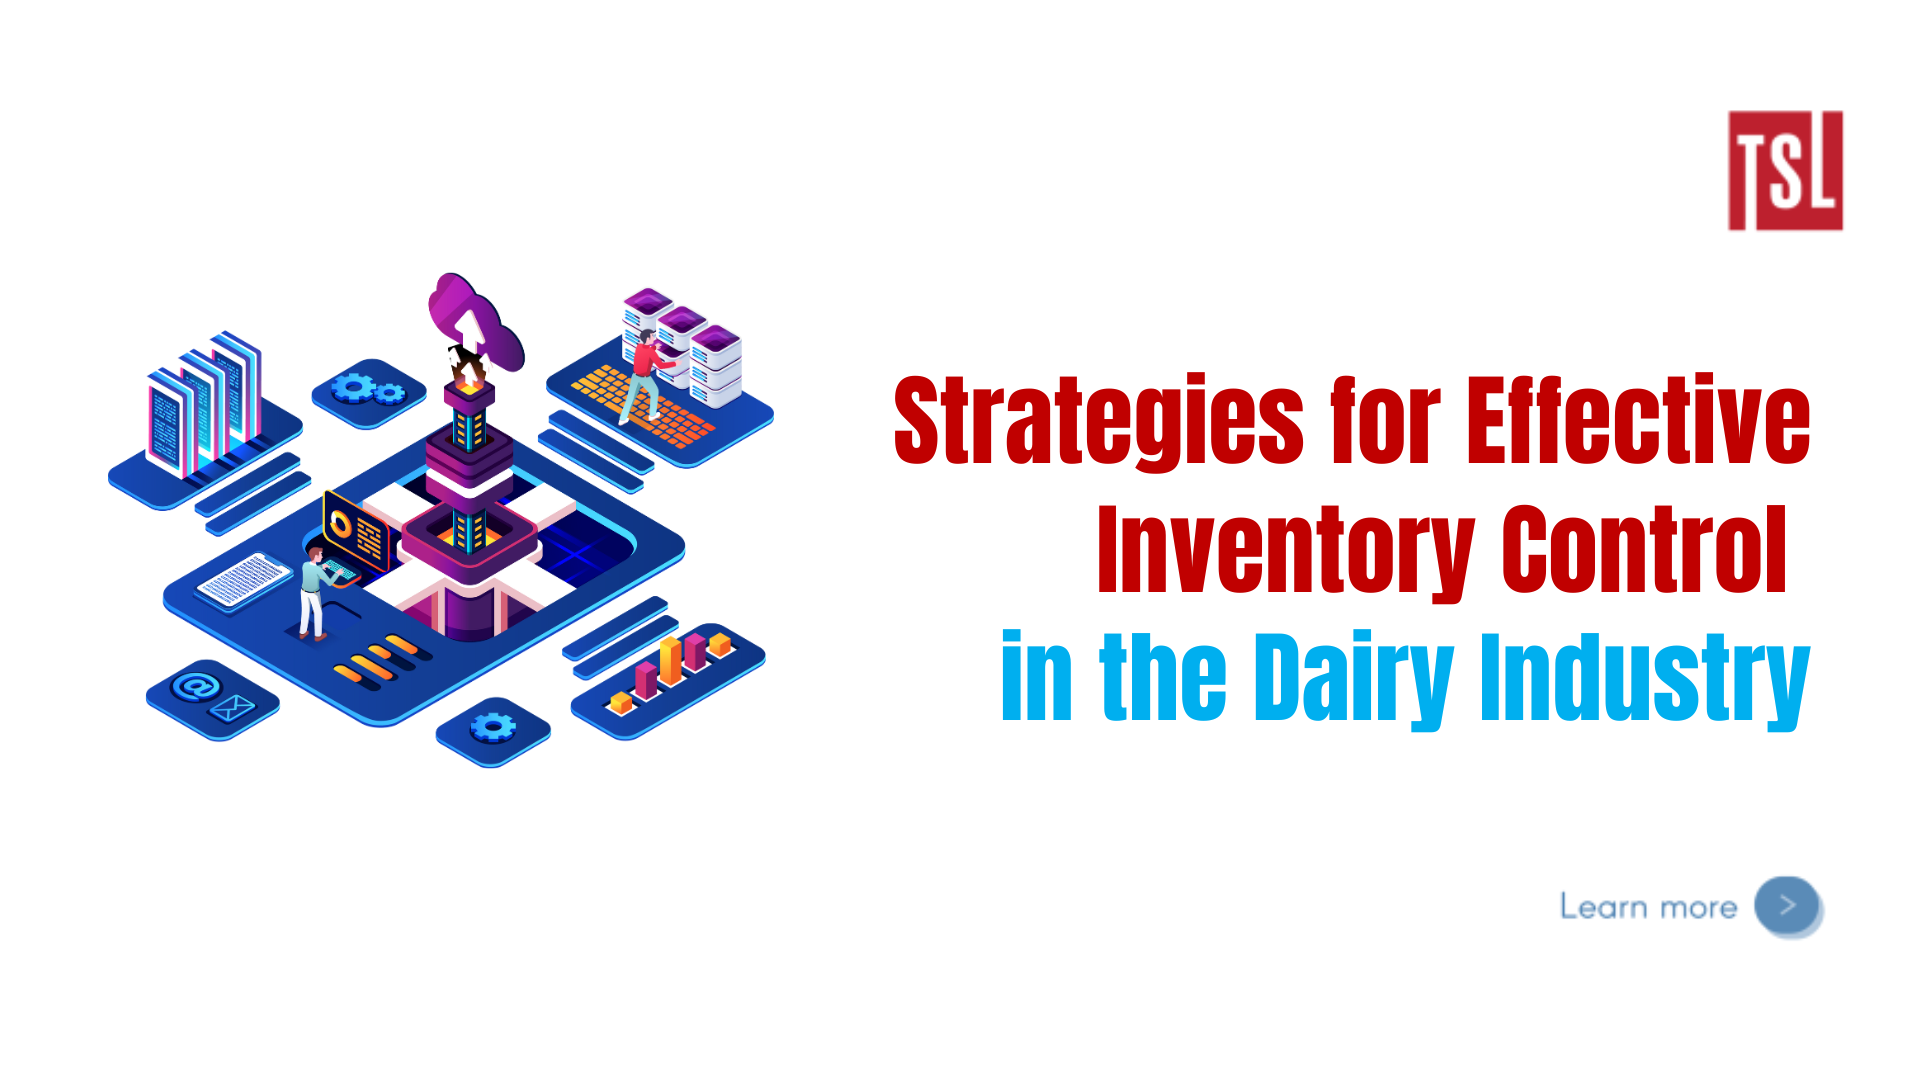 Strategies for Effective Inventory Control in the Dairy Industry